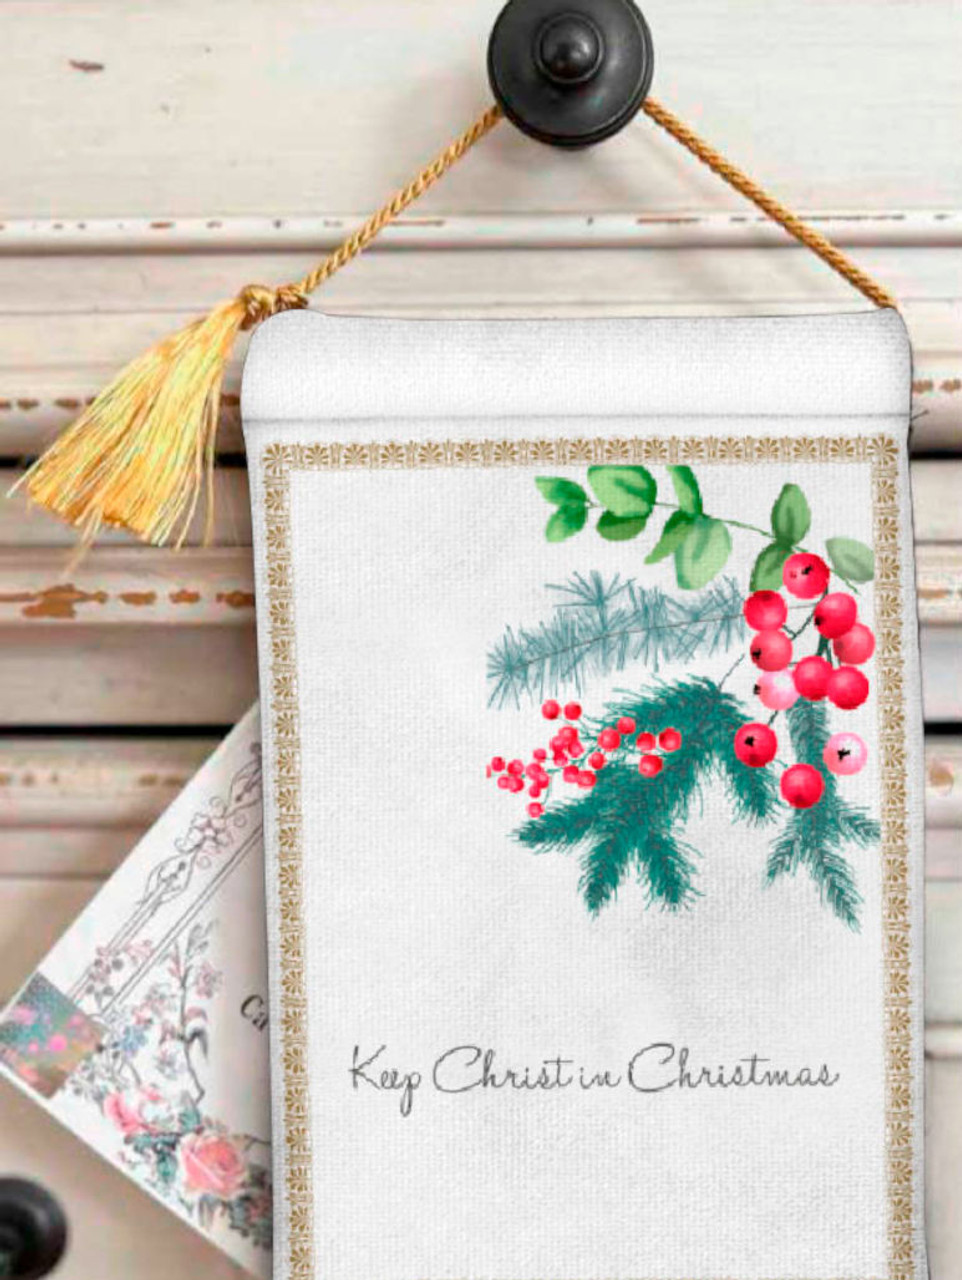 Velvet Blessing Pouch - The March Keep Christ in Christmas